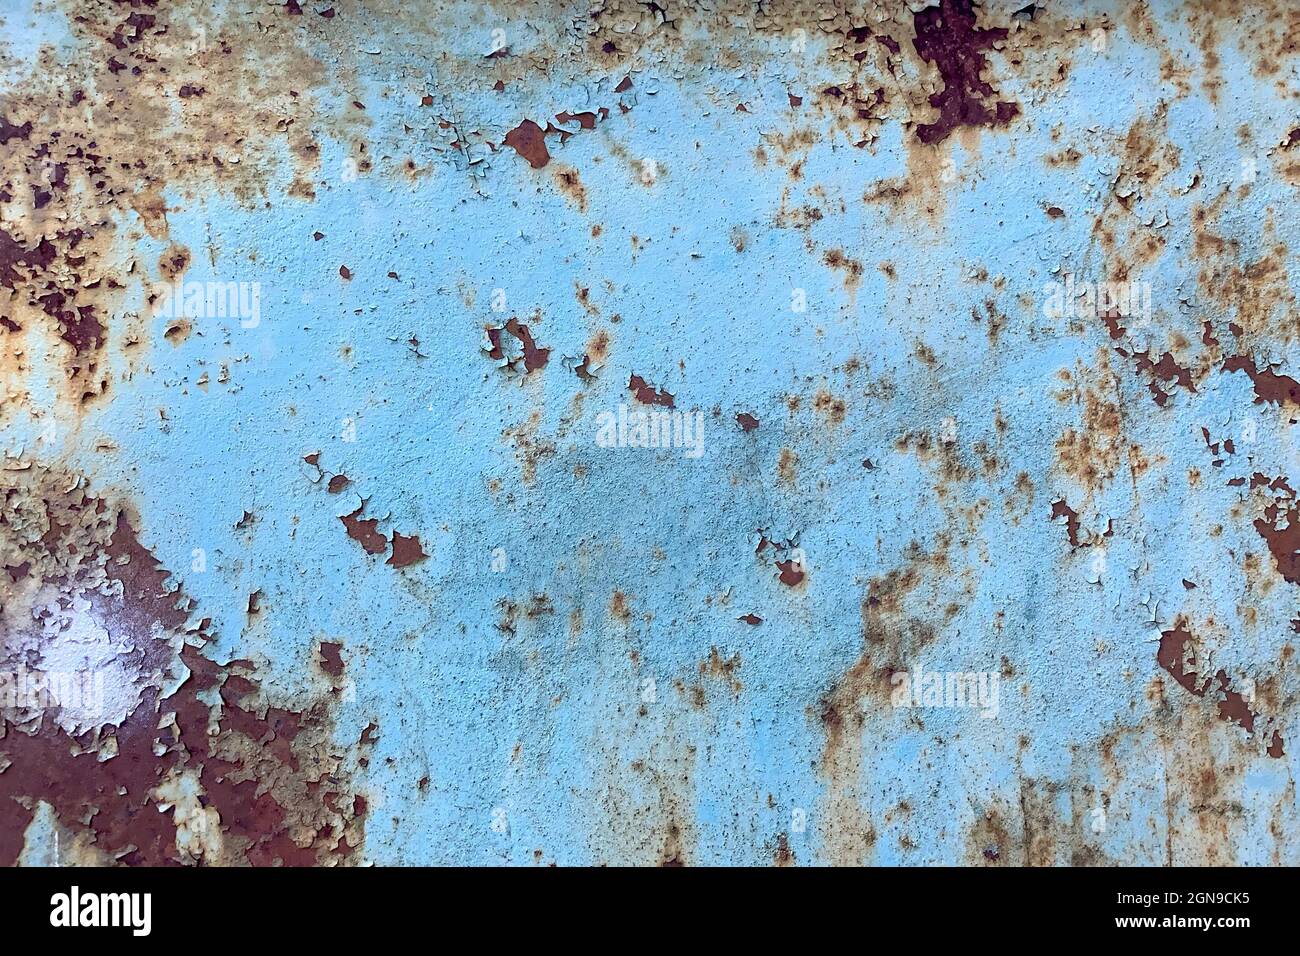 Damaged old peeling paint blue background rusty metal flat pallet. Cracked oil paint on aged metal surface. Close-up. Outdoors. Stock Photo